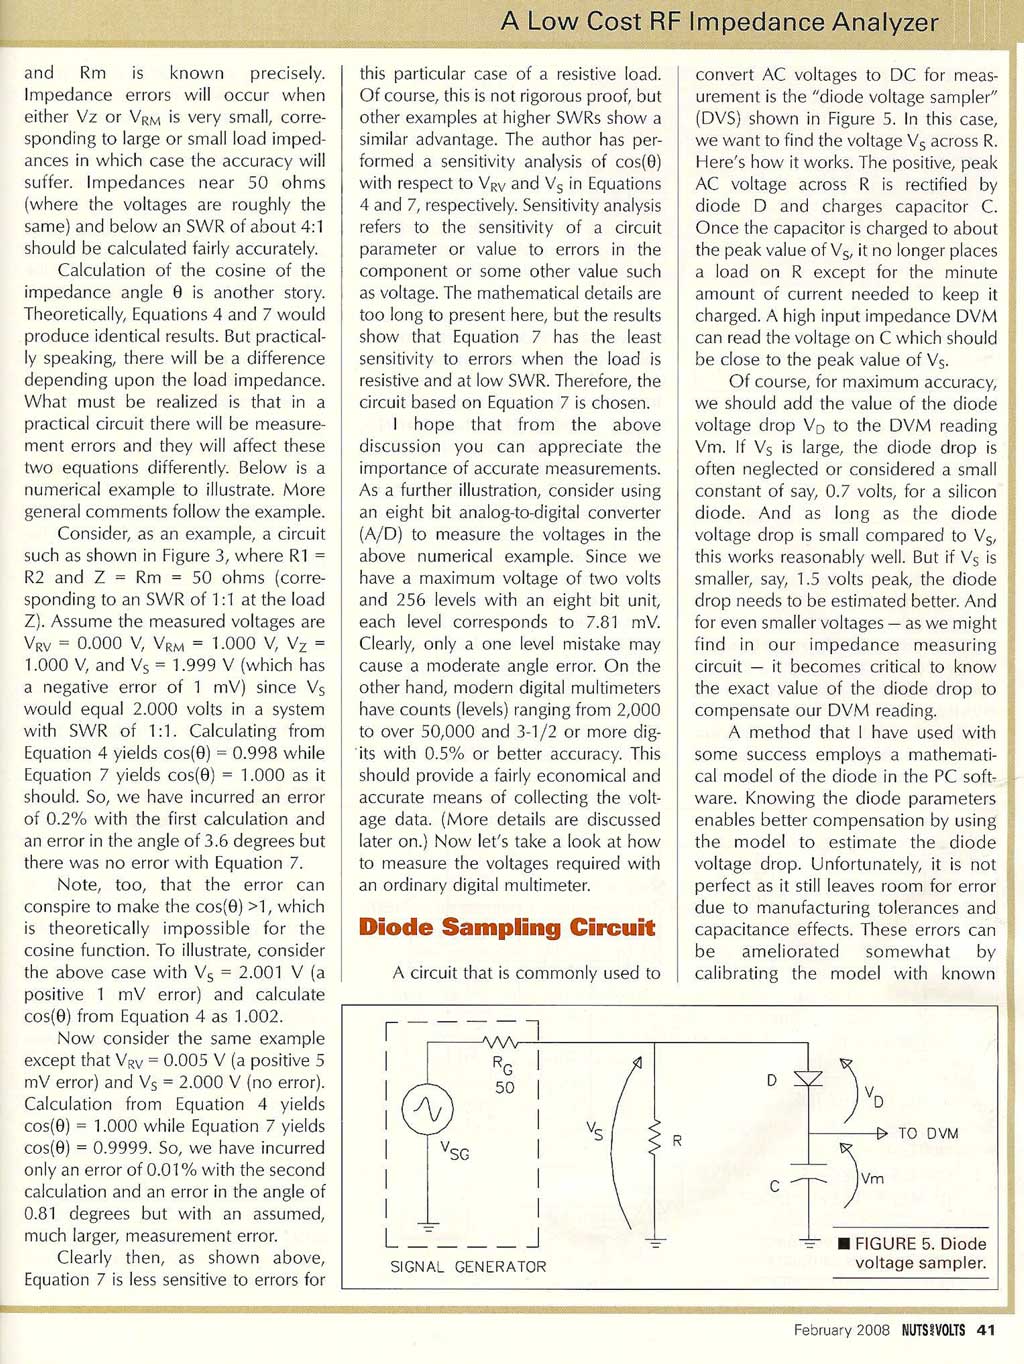 scanned page 41 from Nuts & Volts, Feb 2008